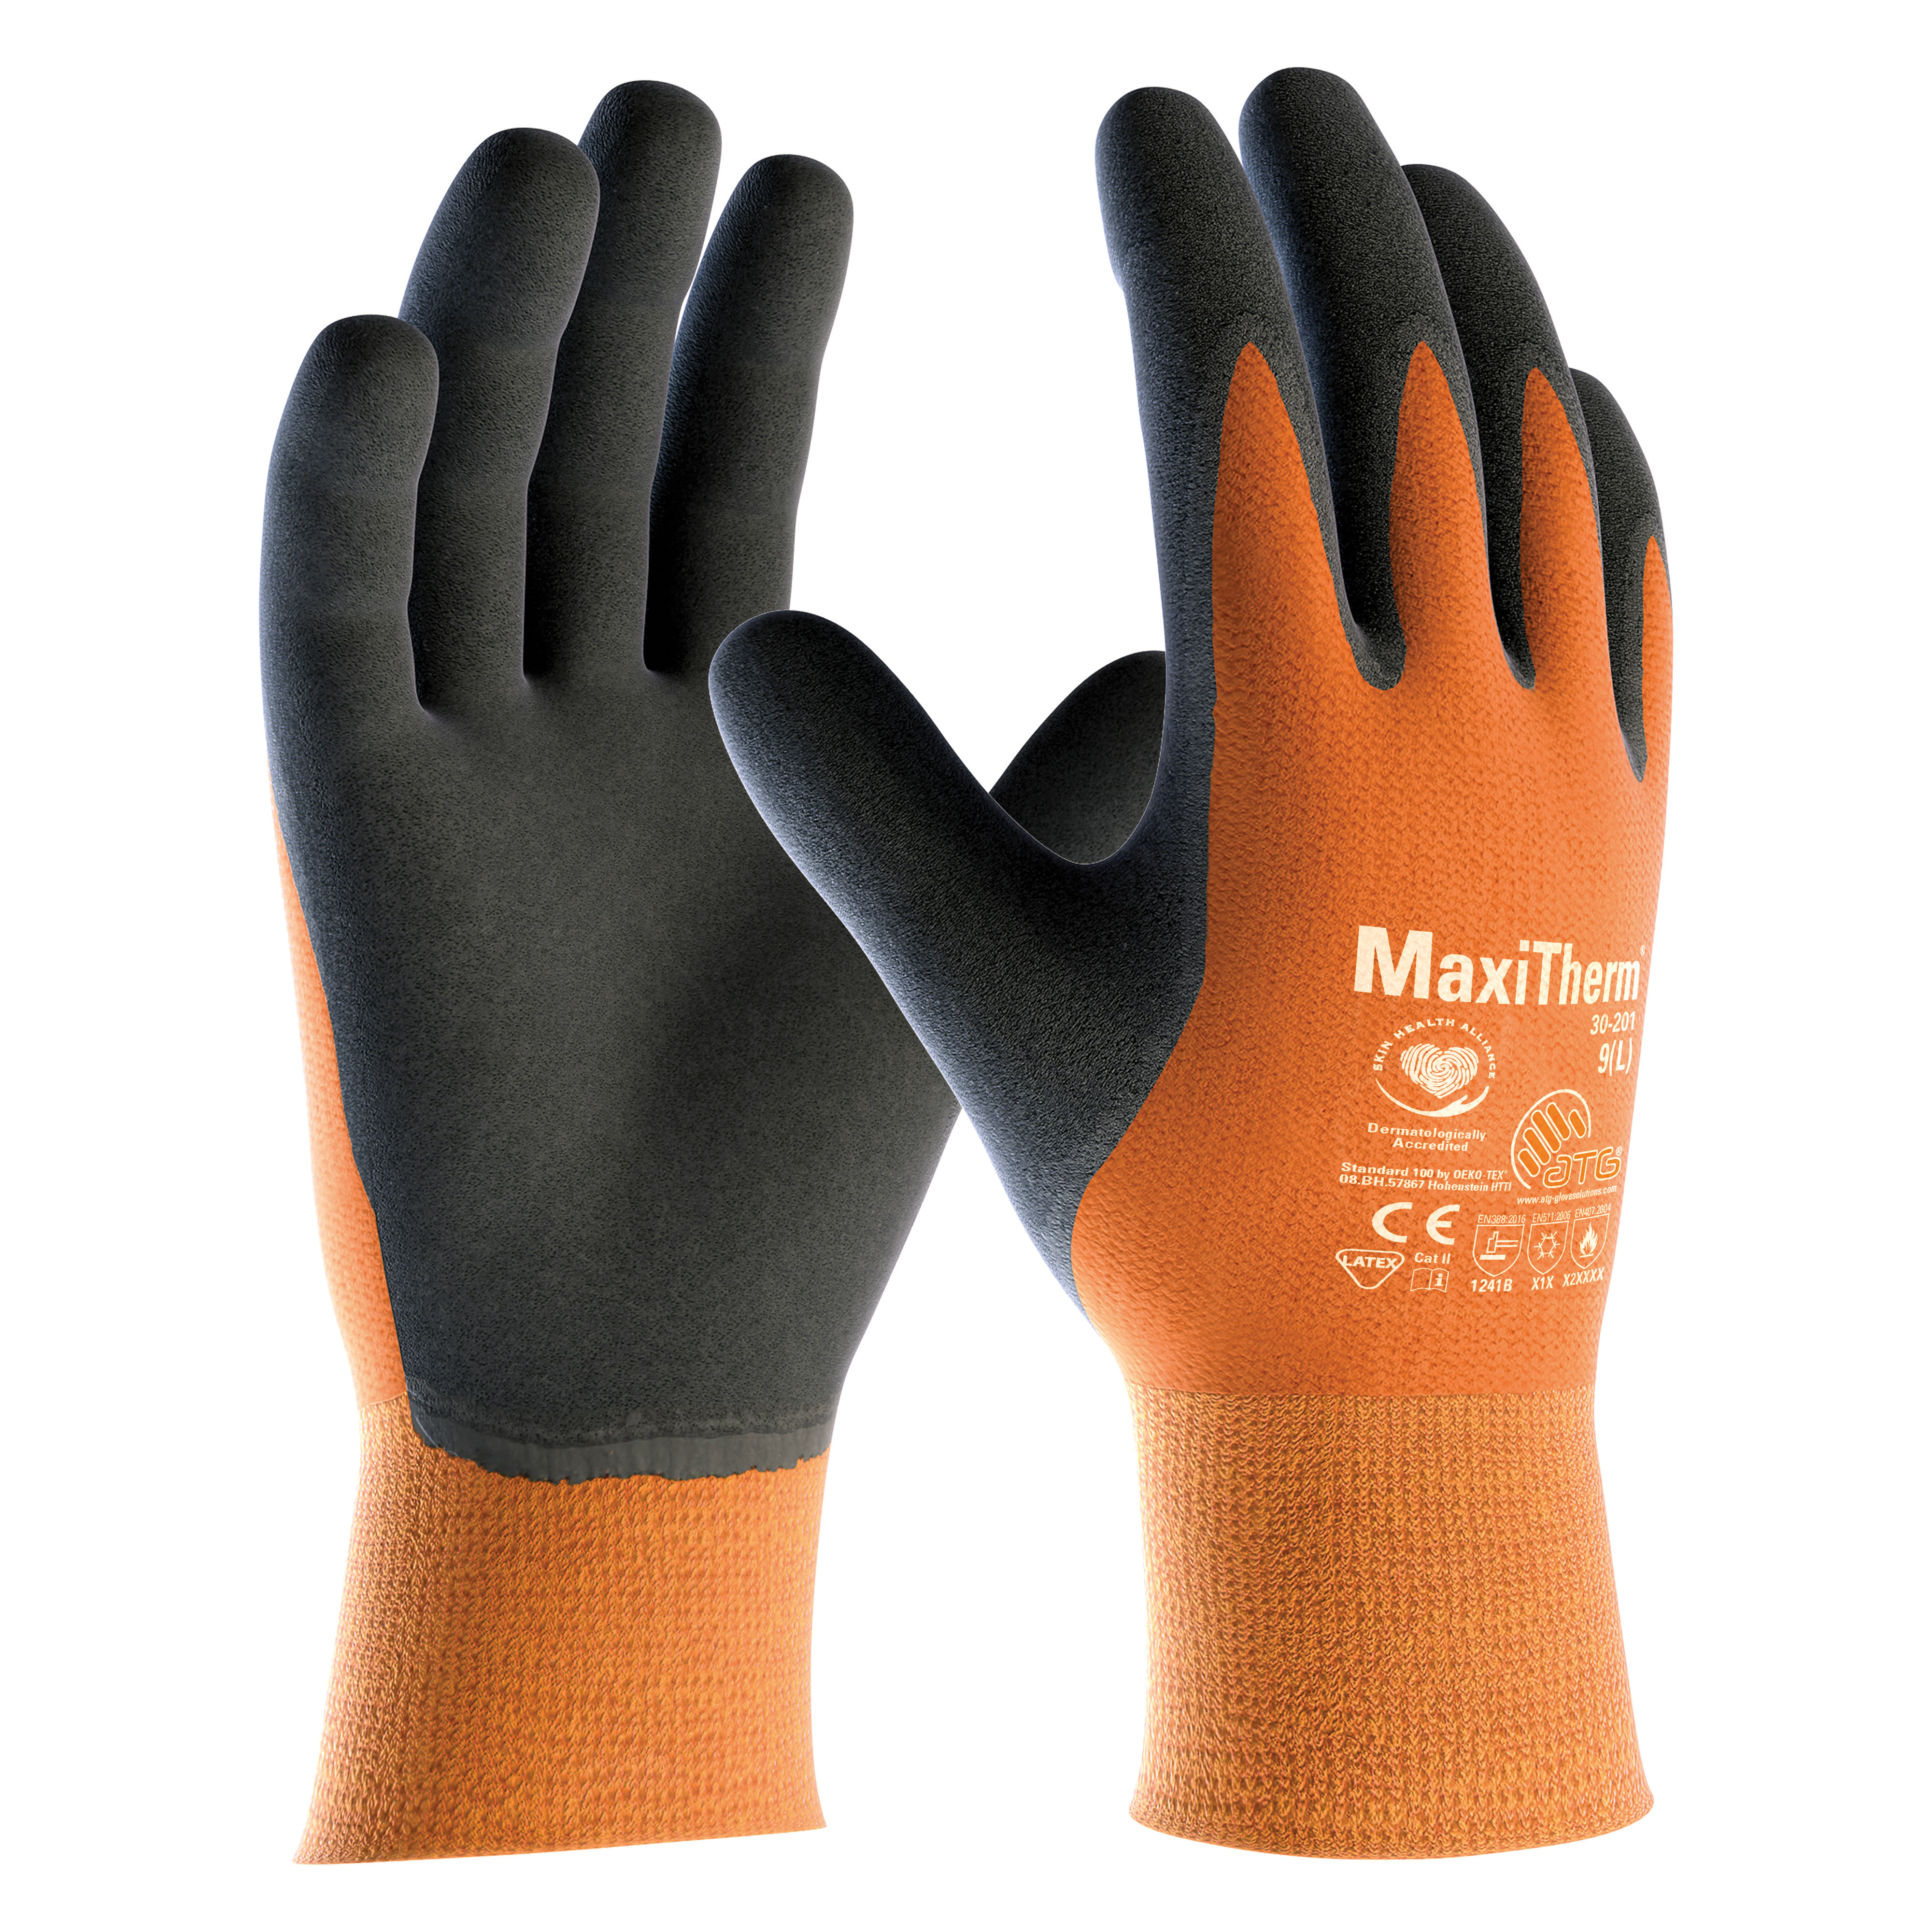 ATG MaxiTherm Latex Palm-Coated Thermal Water-Resistant Gloves